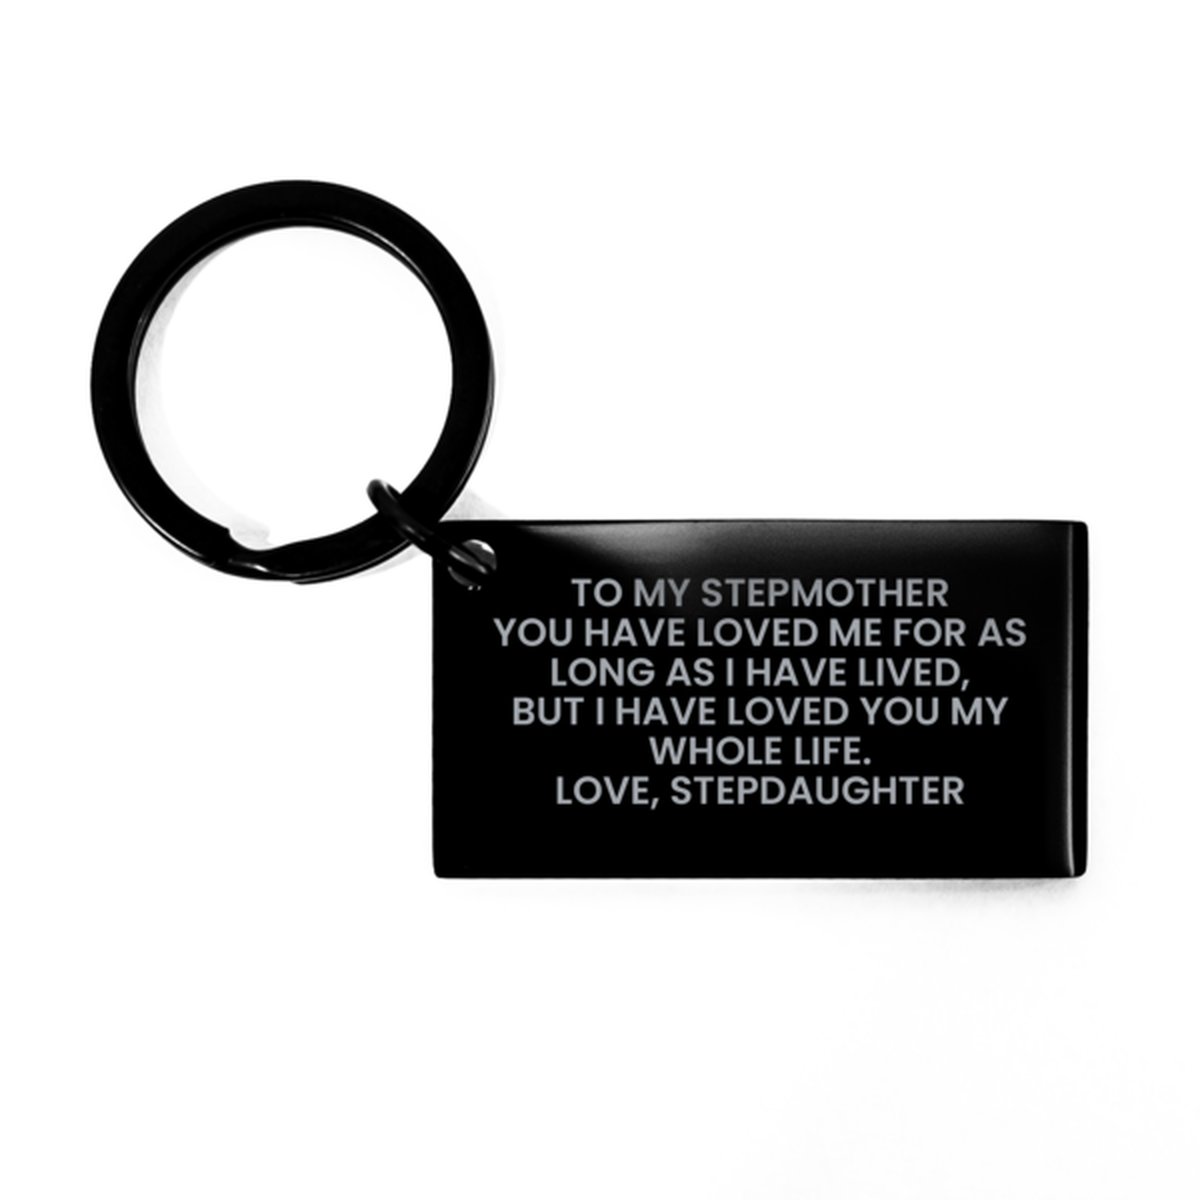 To My Stepmother Black Keychain, Loved You My Whole Life, Mothers Day Gifts For Stepmother From Stepdaughter, Birthday Gifts For Women